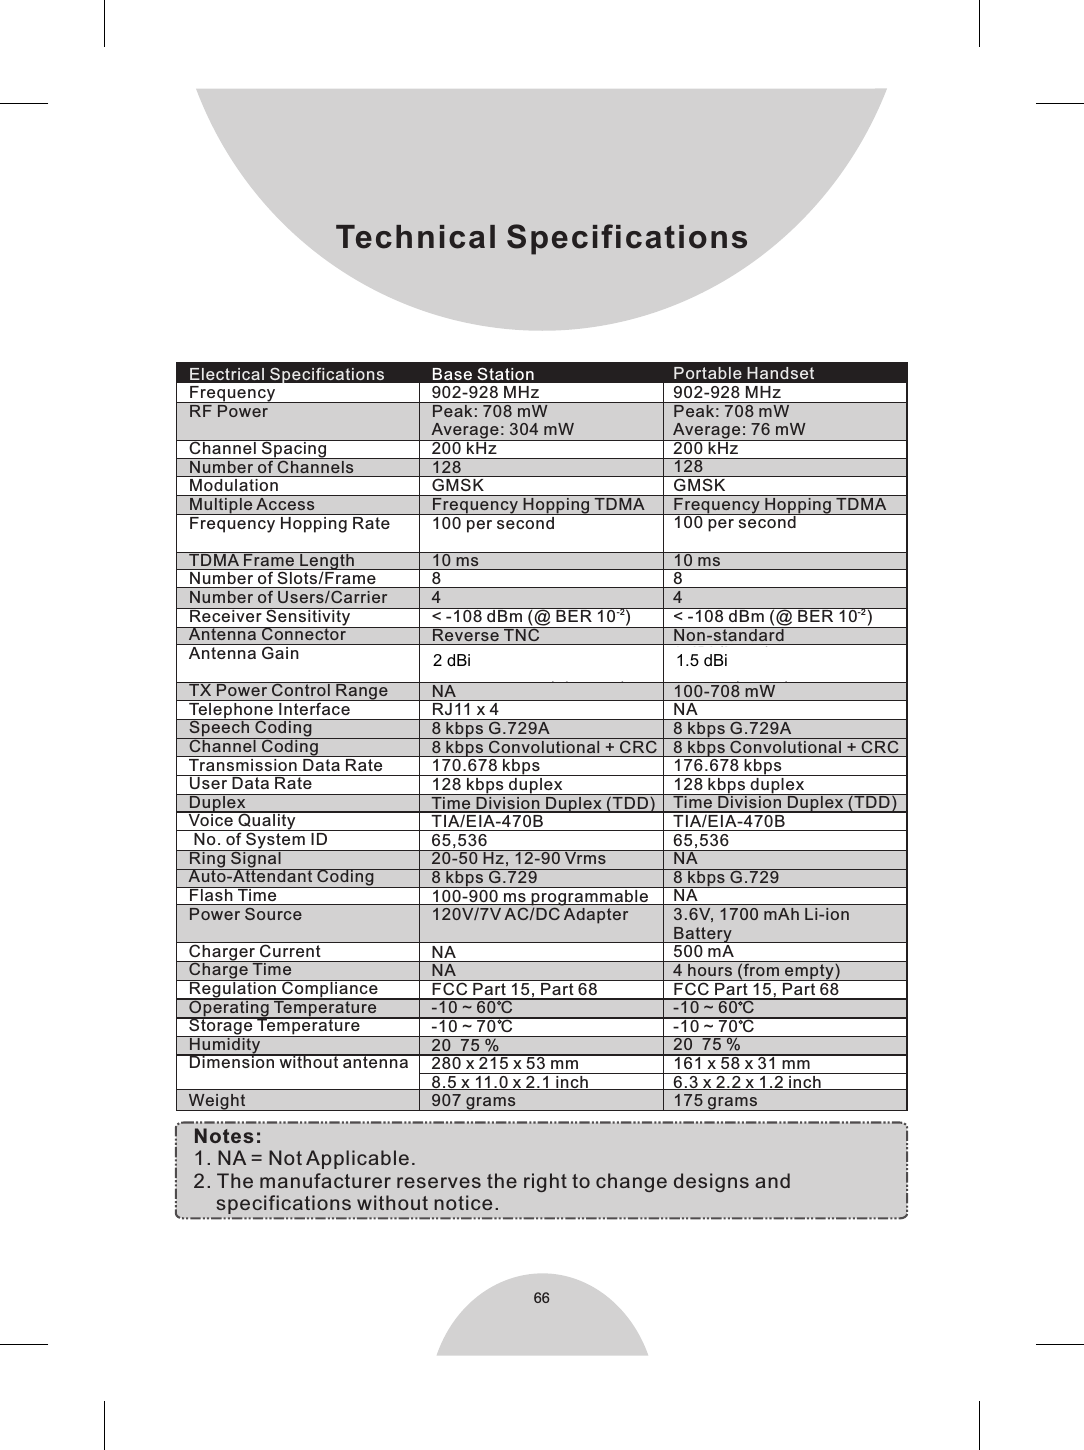 Technical SpecificationsNotes:1. NA = Not Applicable.2. The manufacturer reserves the right to change designs and    specifications without notice.Electrical SpecificationsFrequencyRF PowerChannel Spacing Number of ChannelsModulationMultiple AccessFrequency Hopping RateTDMA Frame LengthNumber of Slots/FrameNumber of Users/CarrierReceiver SensitivityAntenna ConnectorAntenna GainTX Power Control Range Telephone Interface Speech CodingChannel CodingTransmission Data RateUser Data RateDuplexVoice Quality No. of System IDRing SignalAuto-Attendant CodingFlash TimePower SourceCharger Current Charge Time Regulation ComplianceOperating TemperatureStorage TemperatureHumidityDimension without antennaWeightBase Station902-928 MHzPeak: 708 mWAverage: 304 mW200 kHz128GMSKFrequency Hopping TDMA100 per second10 ms84-2&lt; -108 dBm (@ BER 10 )Reverse TNC2 dBi     dBi External (optional)NARJ11 x 48 kbps G.729A8 kbps Convolutional + CRC170.678 kbps128 kbps duplexTime Division Duplex (TDD)TIA/EIA-470B65,53620-50 Hz, 12-90 Vrms8 kbps G.729100-900 ms programmable120V/7V AC/DC AdapterNANAFCC Part 15, Part 68-10 ~ 60 C-10 ~ 70 C20  75 %280 x 215 x 53 mm8.5 x 11.0 x 2.1 inch907 gramsPortable Handset902-928 MHzPeak: 708 mWAverage: 76 mW200 kHz128GMSKFrequency Hopping TDMA100 per second10 ms84-2&lt; -108 dBm (@ BER 10 )Non-standard2 dBi (Long)0.5 dBi (Short)100-708 mWNA8 kbps G.729A8 kbps Convolutional + CRC176.678 kbps128 kbps duplexTime Division Duplex (TDD)TIA/EIA-470B65,536NA8 kbps G.729NA3.6V, 1700 mAh Li-ionBattery500 mA4 hours (from empty)FCC Part 15, Part 68-10 ~ 60 C-10 ~ 70 C20  75 %161 x 58 x 31 mm6.3175 grams x 2.2 x 1.2 inch6662 dBi1.5 dBi